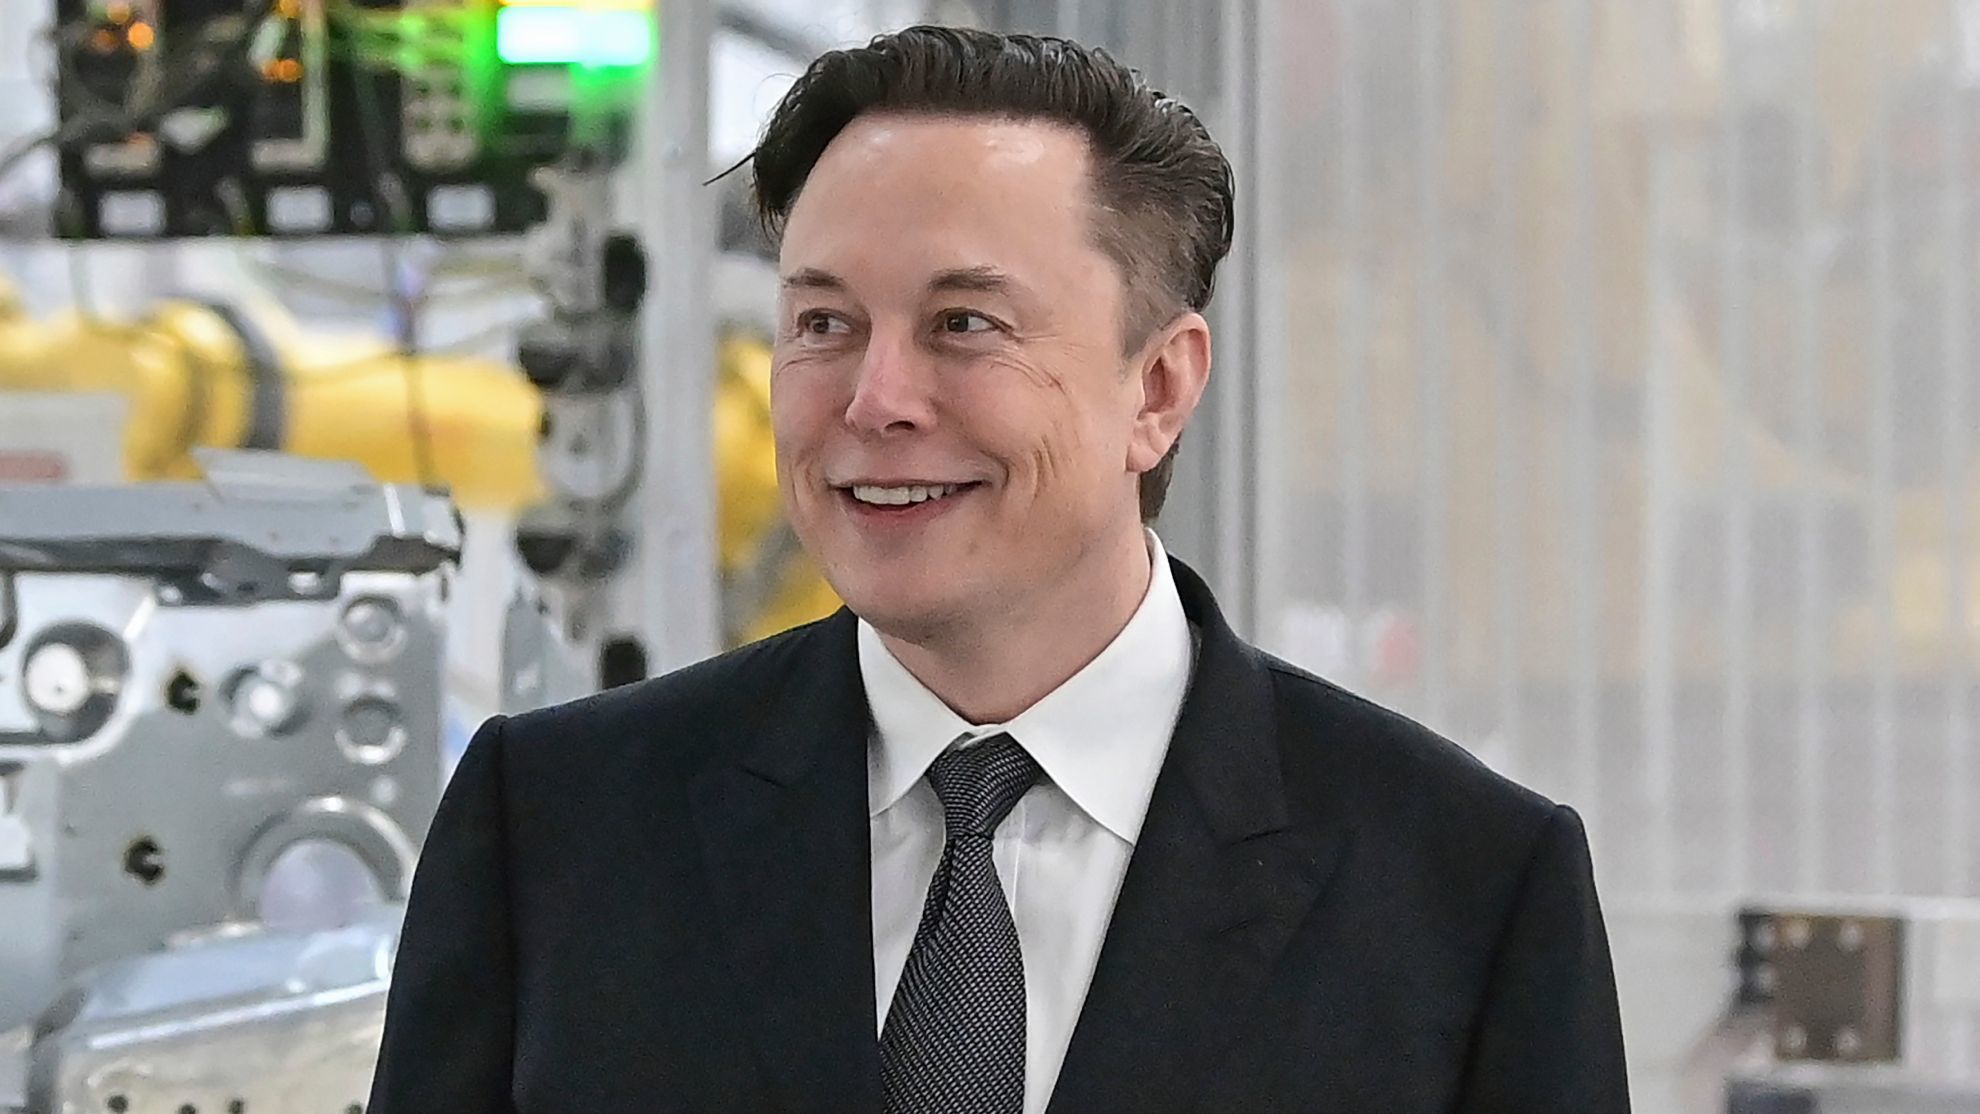 Elon Musk - English, US News, Celebrities - English, why did elon musk buy twitter, how much did elon musk buy twitter for, elon musk announces pre sale of its tesla coin, elon musk giveaway twitter, musk, elon musk twitter, justine musk,